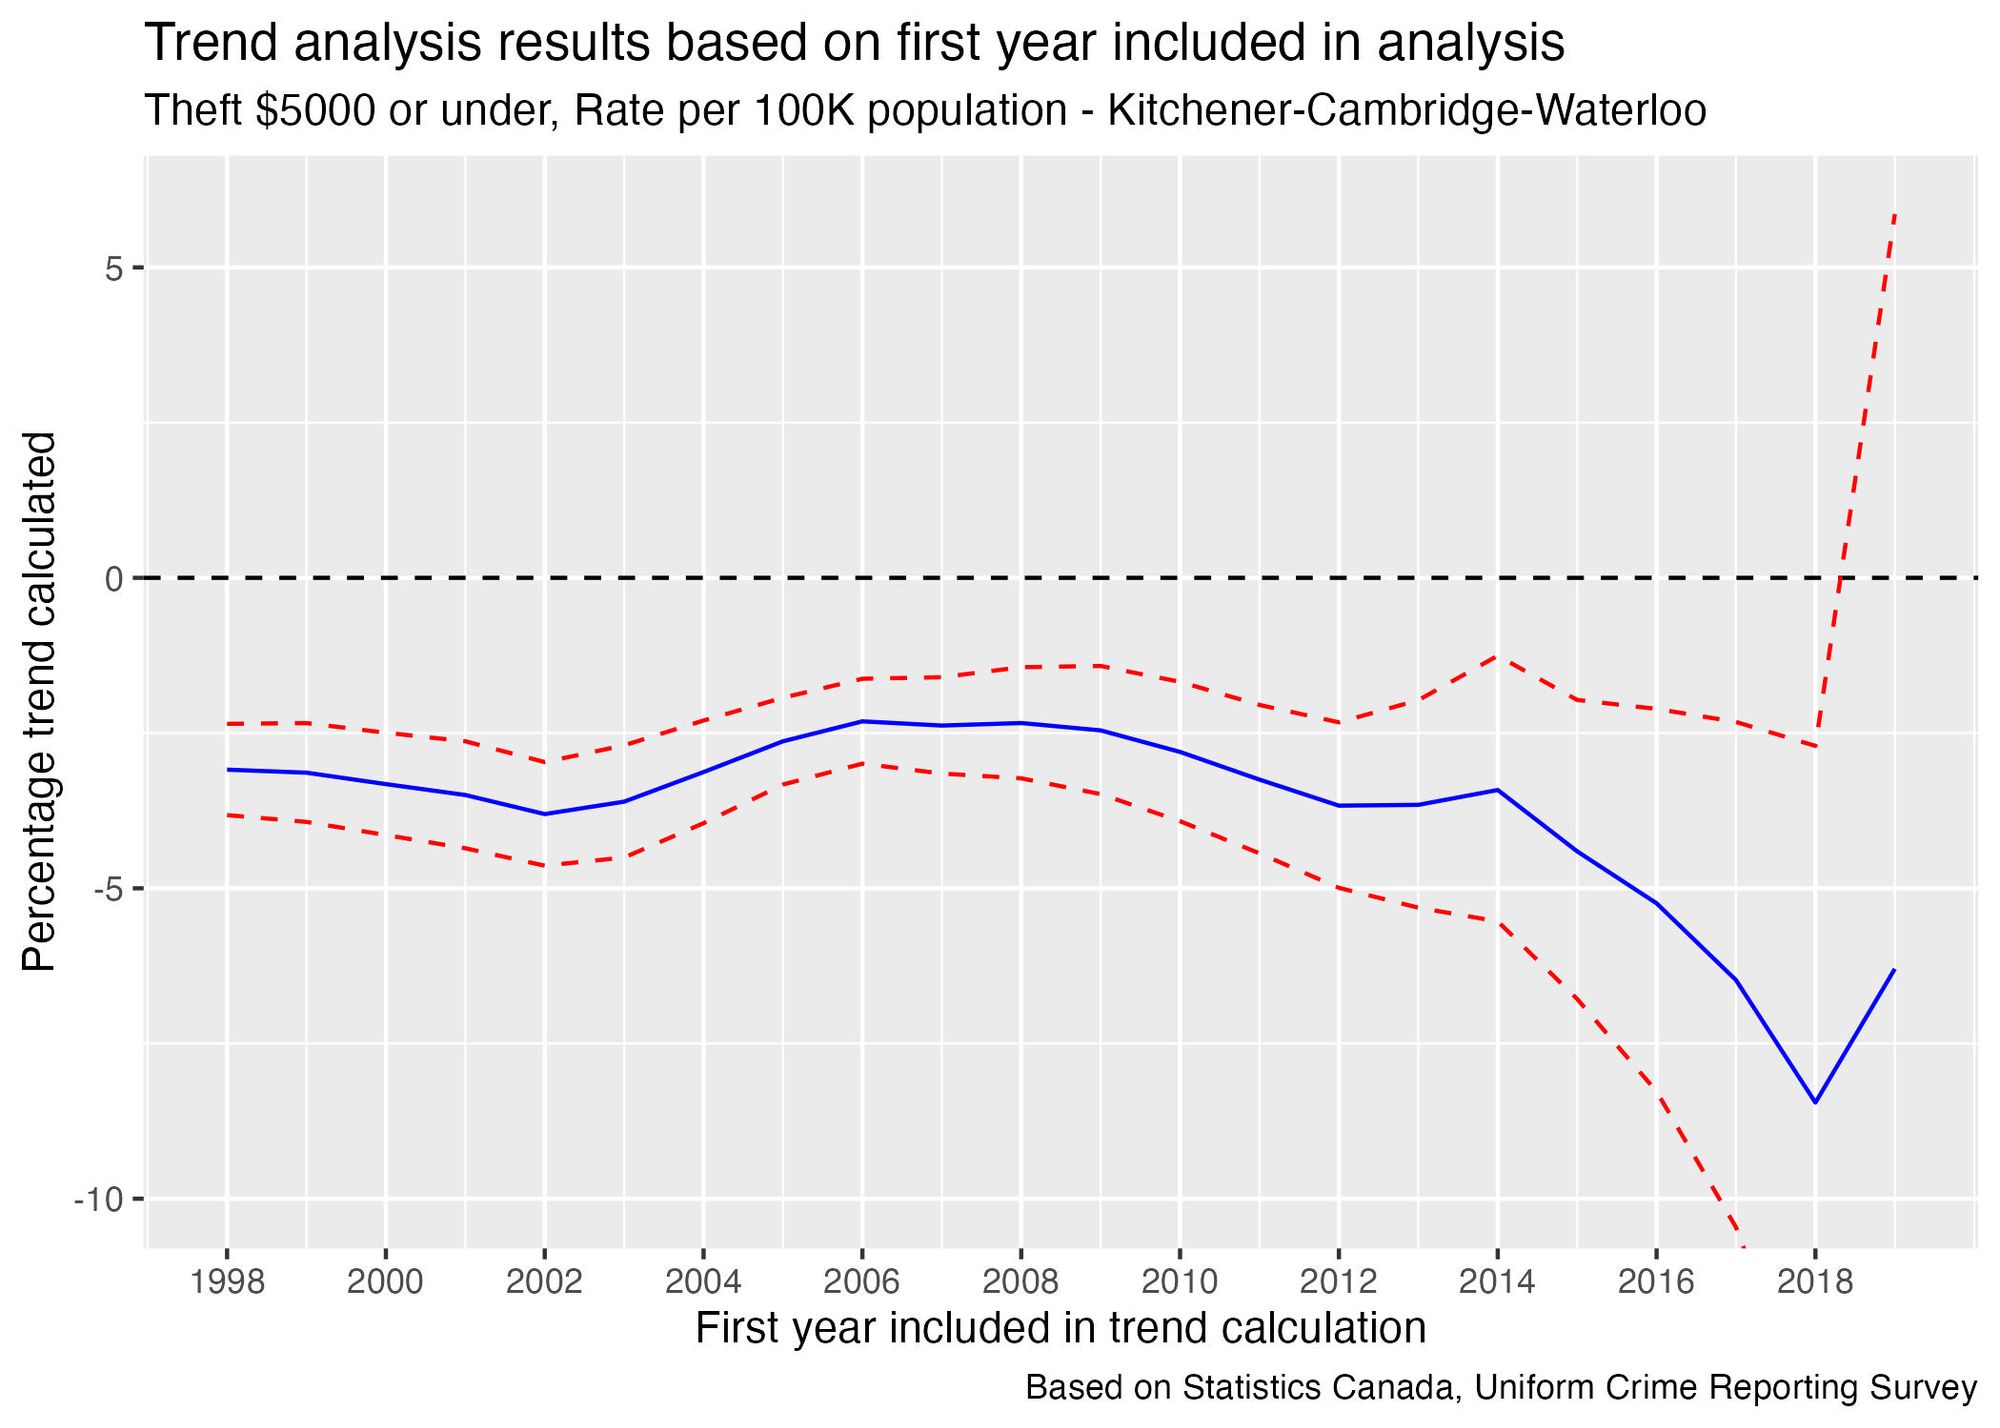 A graph of "Trend Analysis results based on first year included in the analysis" for "Theft $5000 or under, rate per 100K population - Kitchener-Cambridge-Waterloo" between 1998 and 2018. The vertical axis is "Percentage trend calculated".  A blue line hovers fairly consistently in the range between -2% and -3%, with the exception of years 2016 onward where it starts to drop more rapidly below -5%. There are dashed red error lines around the blue line which are fairly close to the blue line up until 2012, and then start widening fairly rapidly in more recent years. 